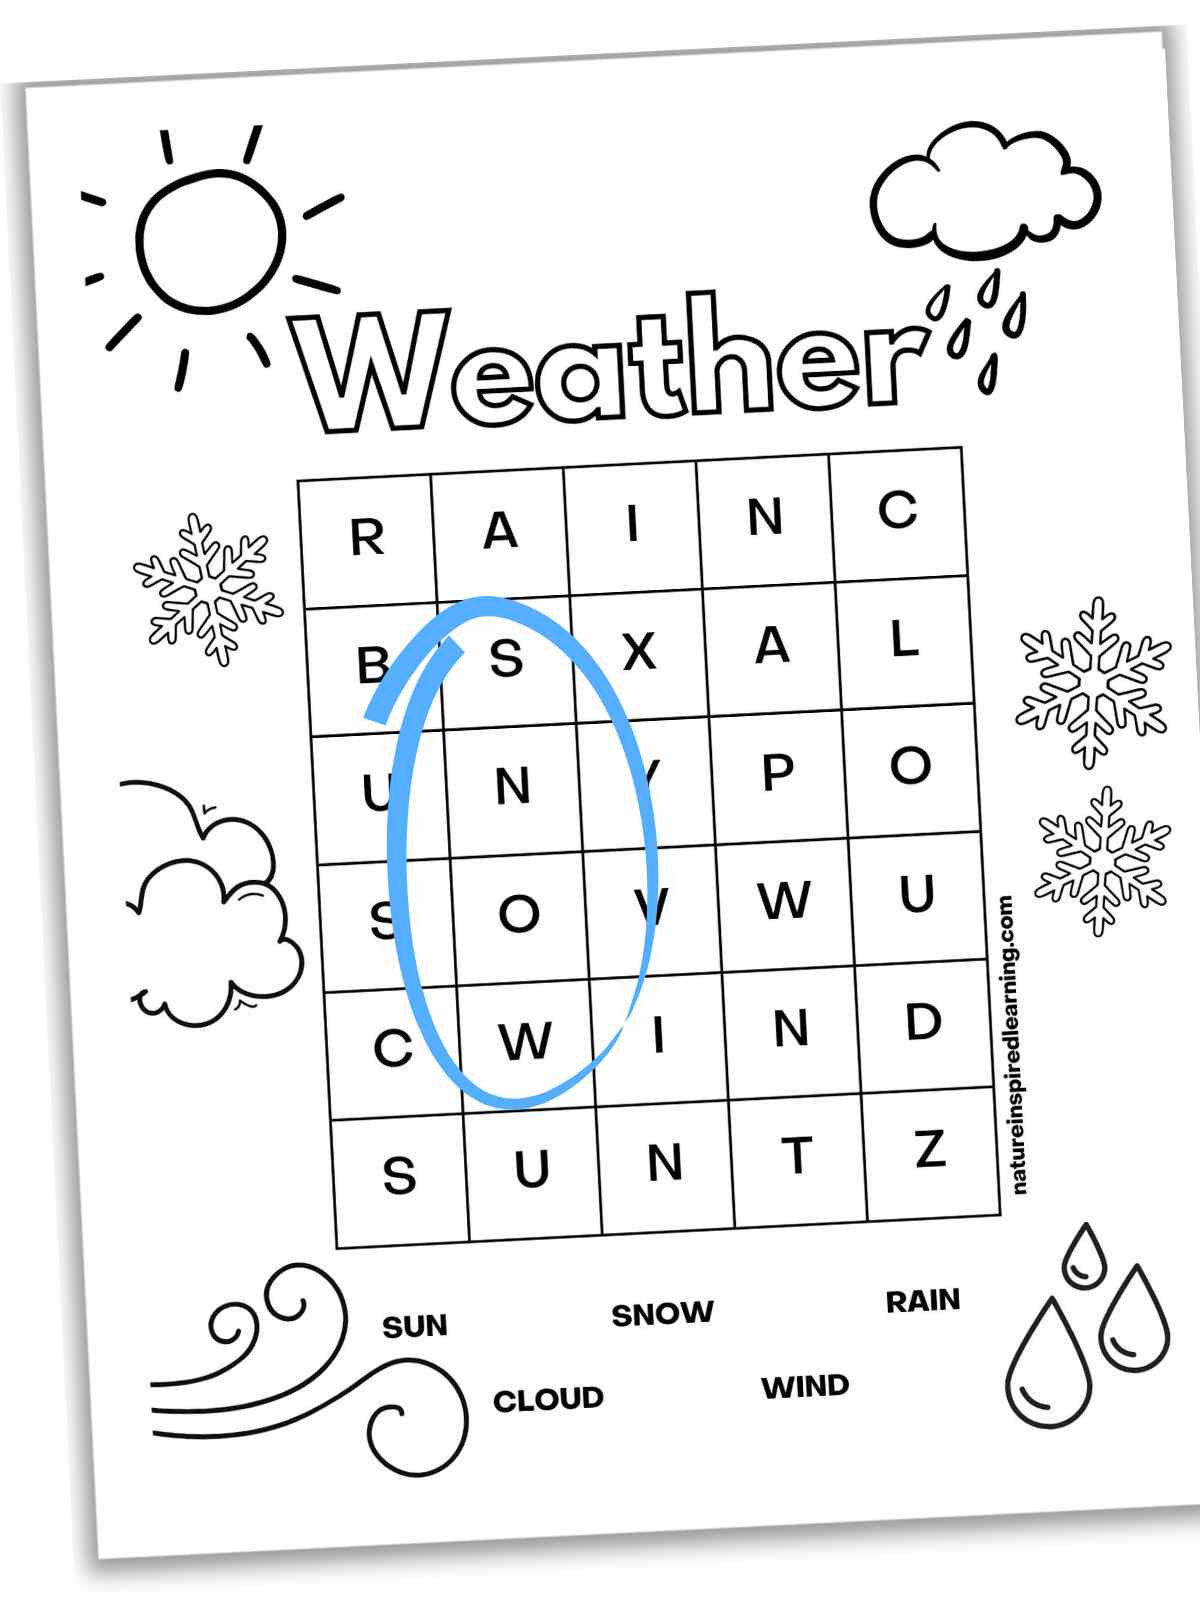 Simple word search with weather words and weather images around the border. Snow circled in blue.